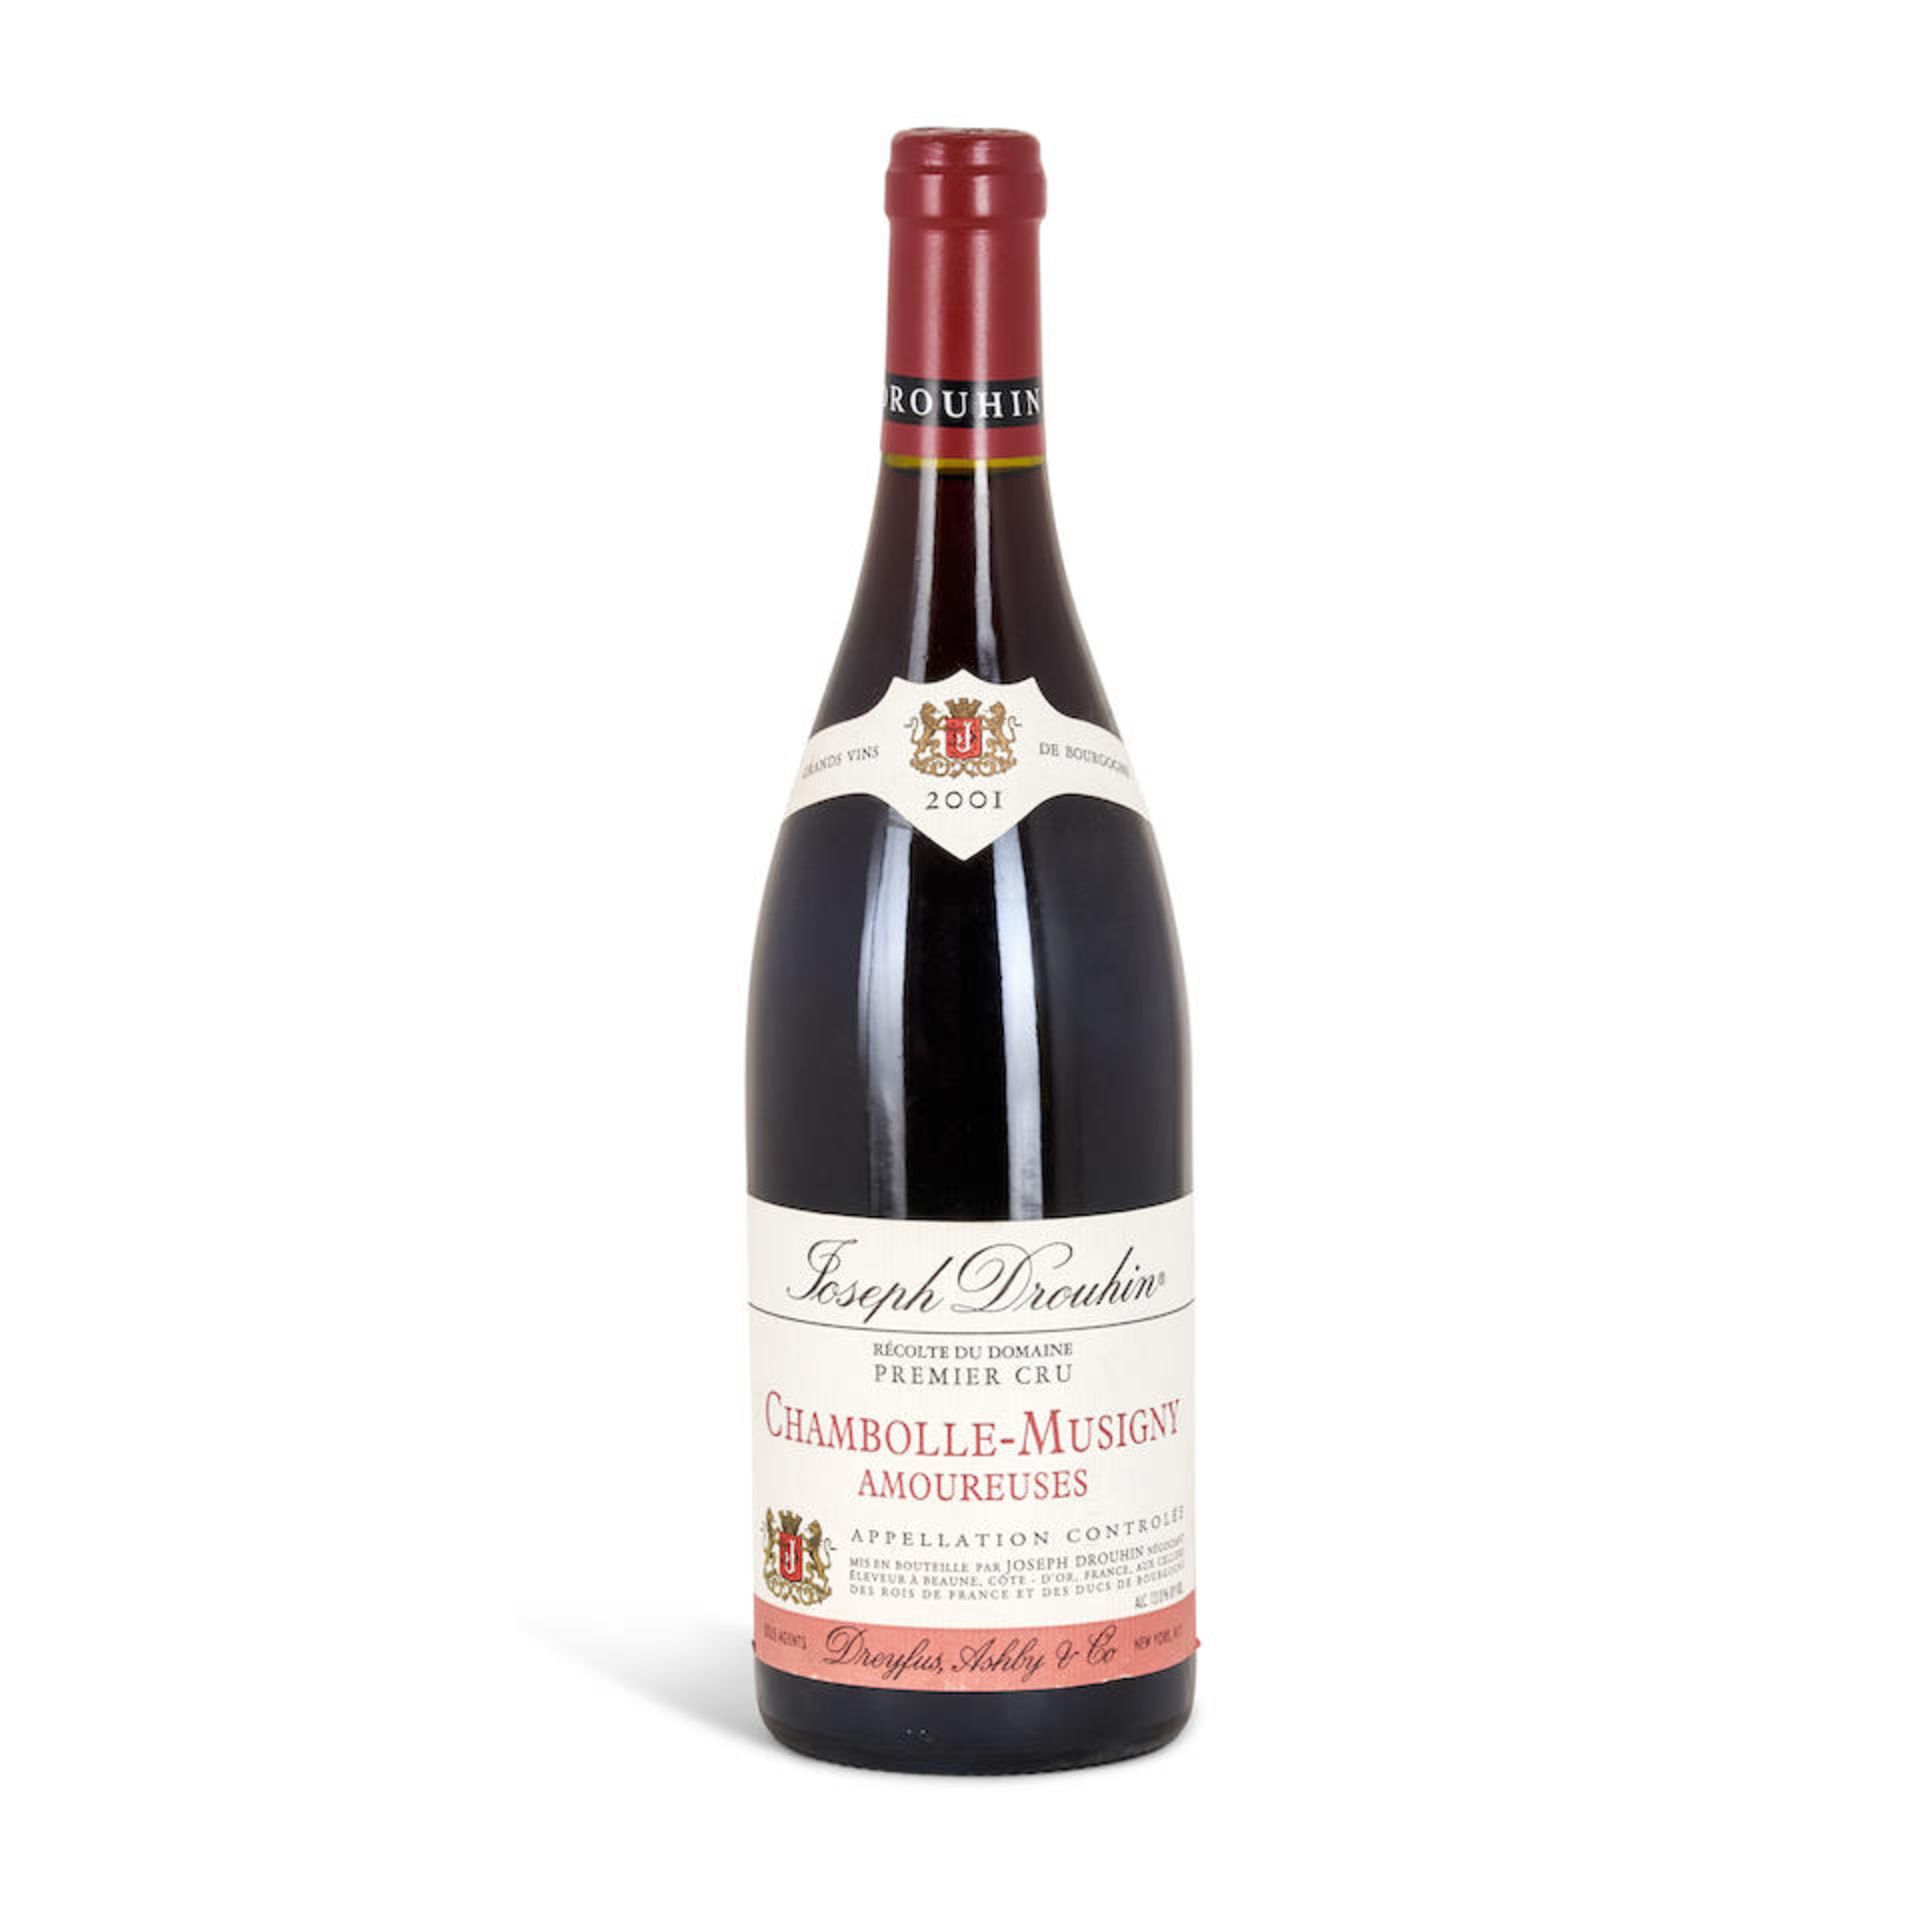 J. Drouhin Chambolle Musigny Les Amoureuses 2001 (1 bottle)